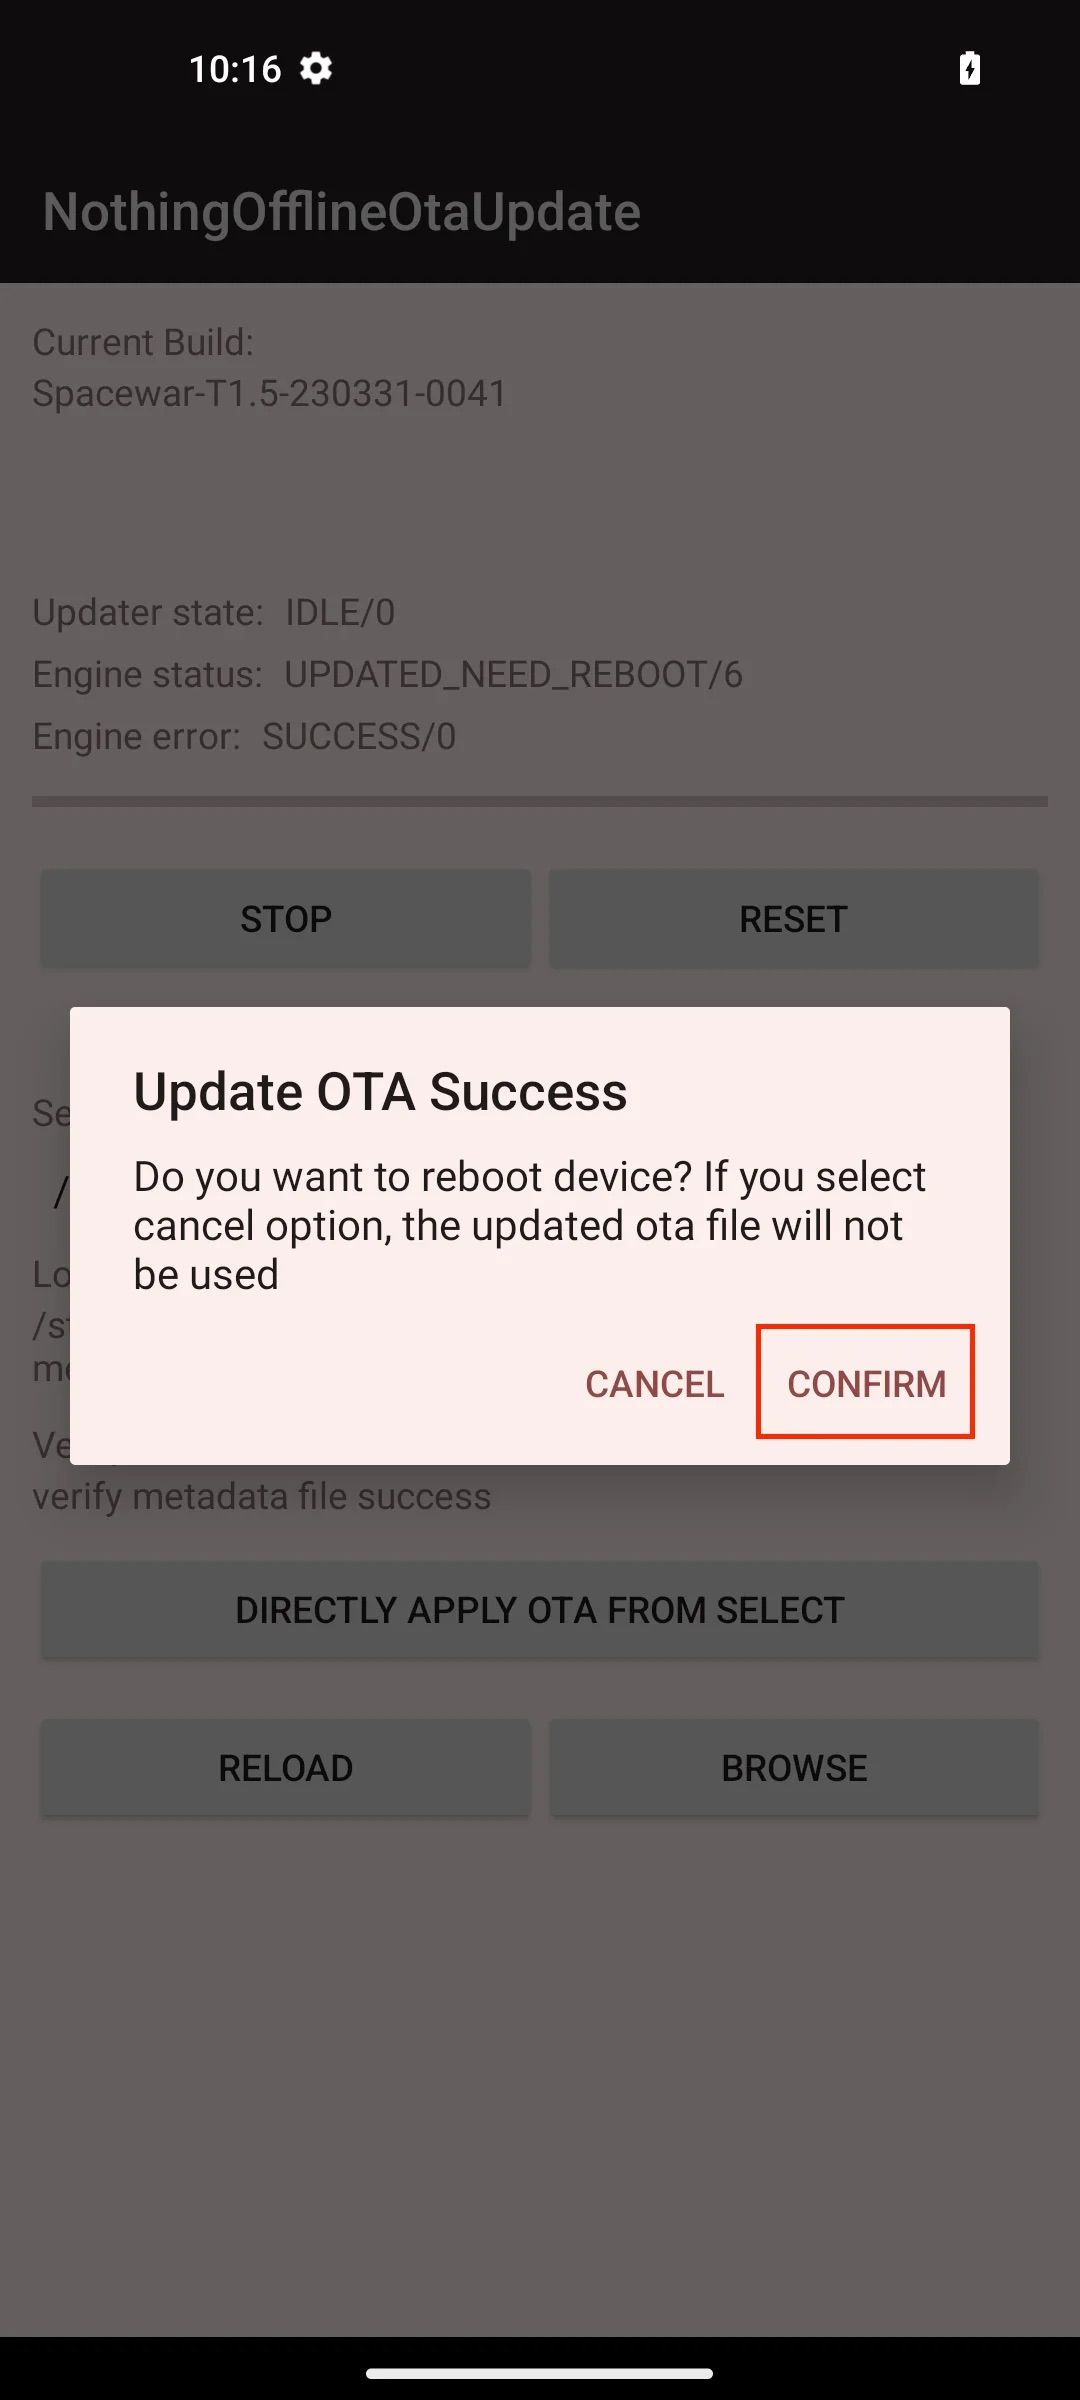 Nothing Phone 1 local update tool showing successful update with confirmation button selected